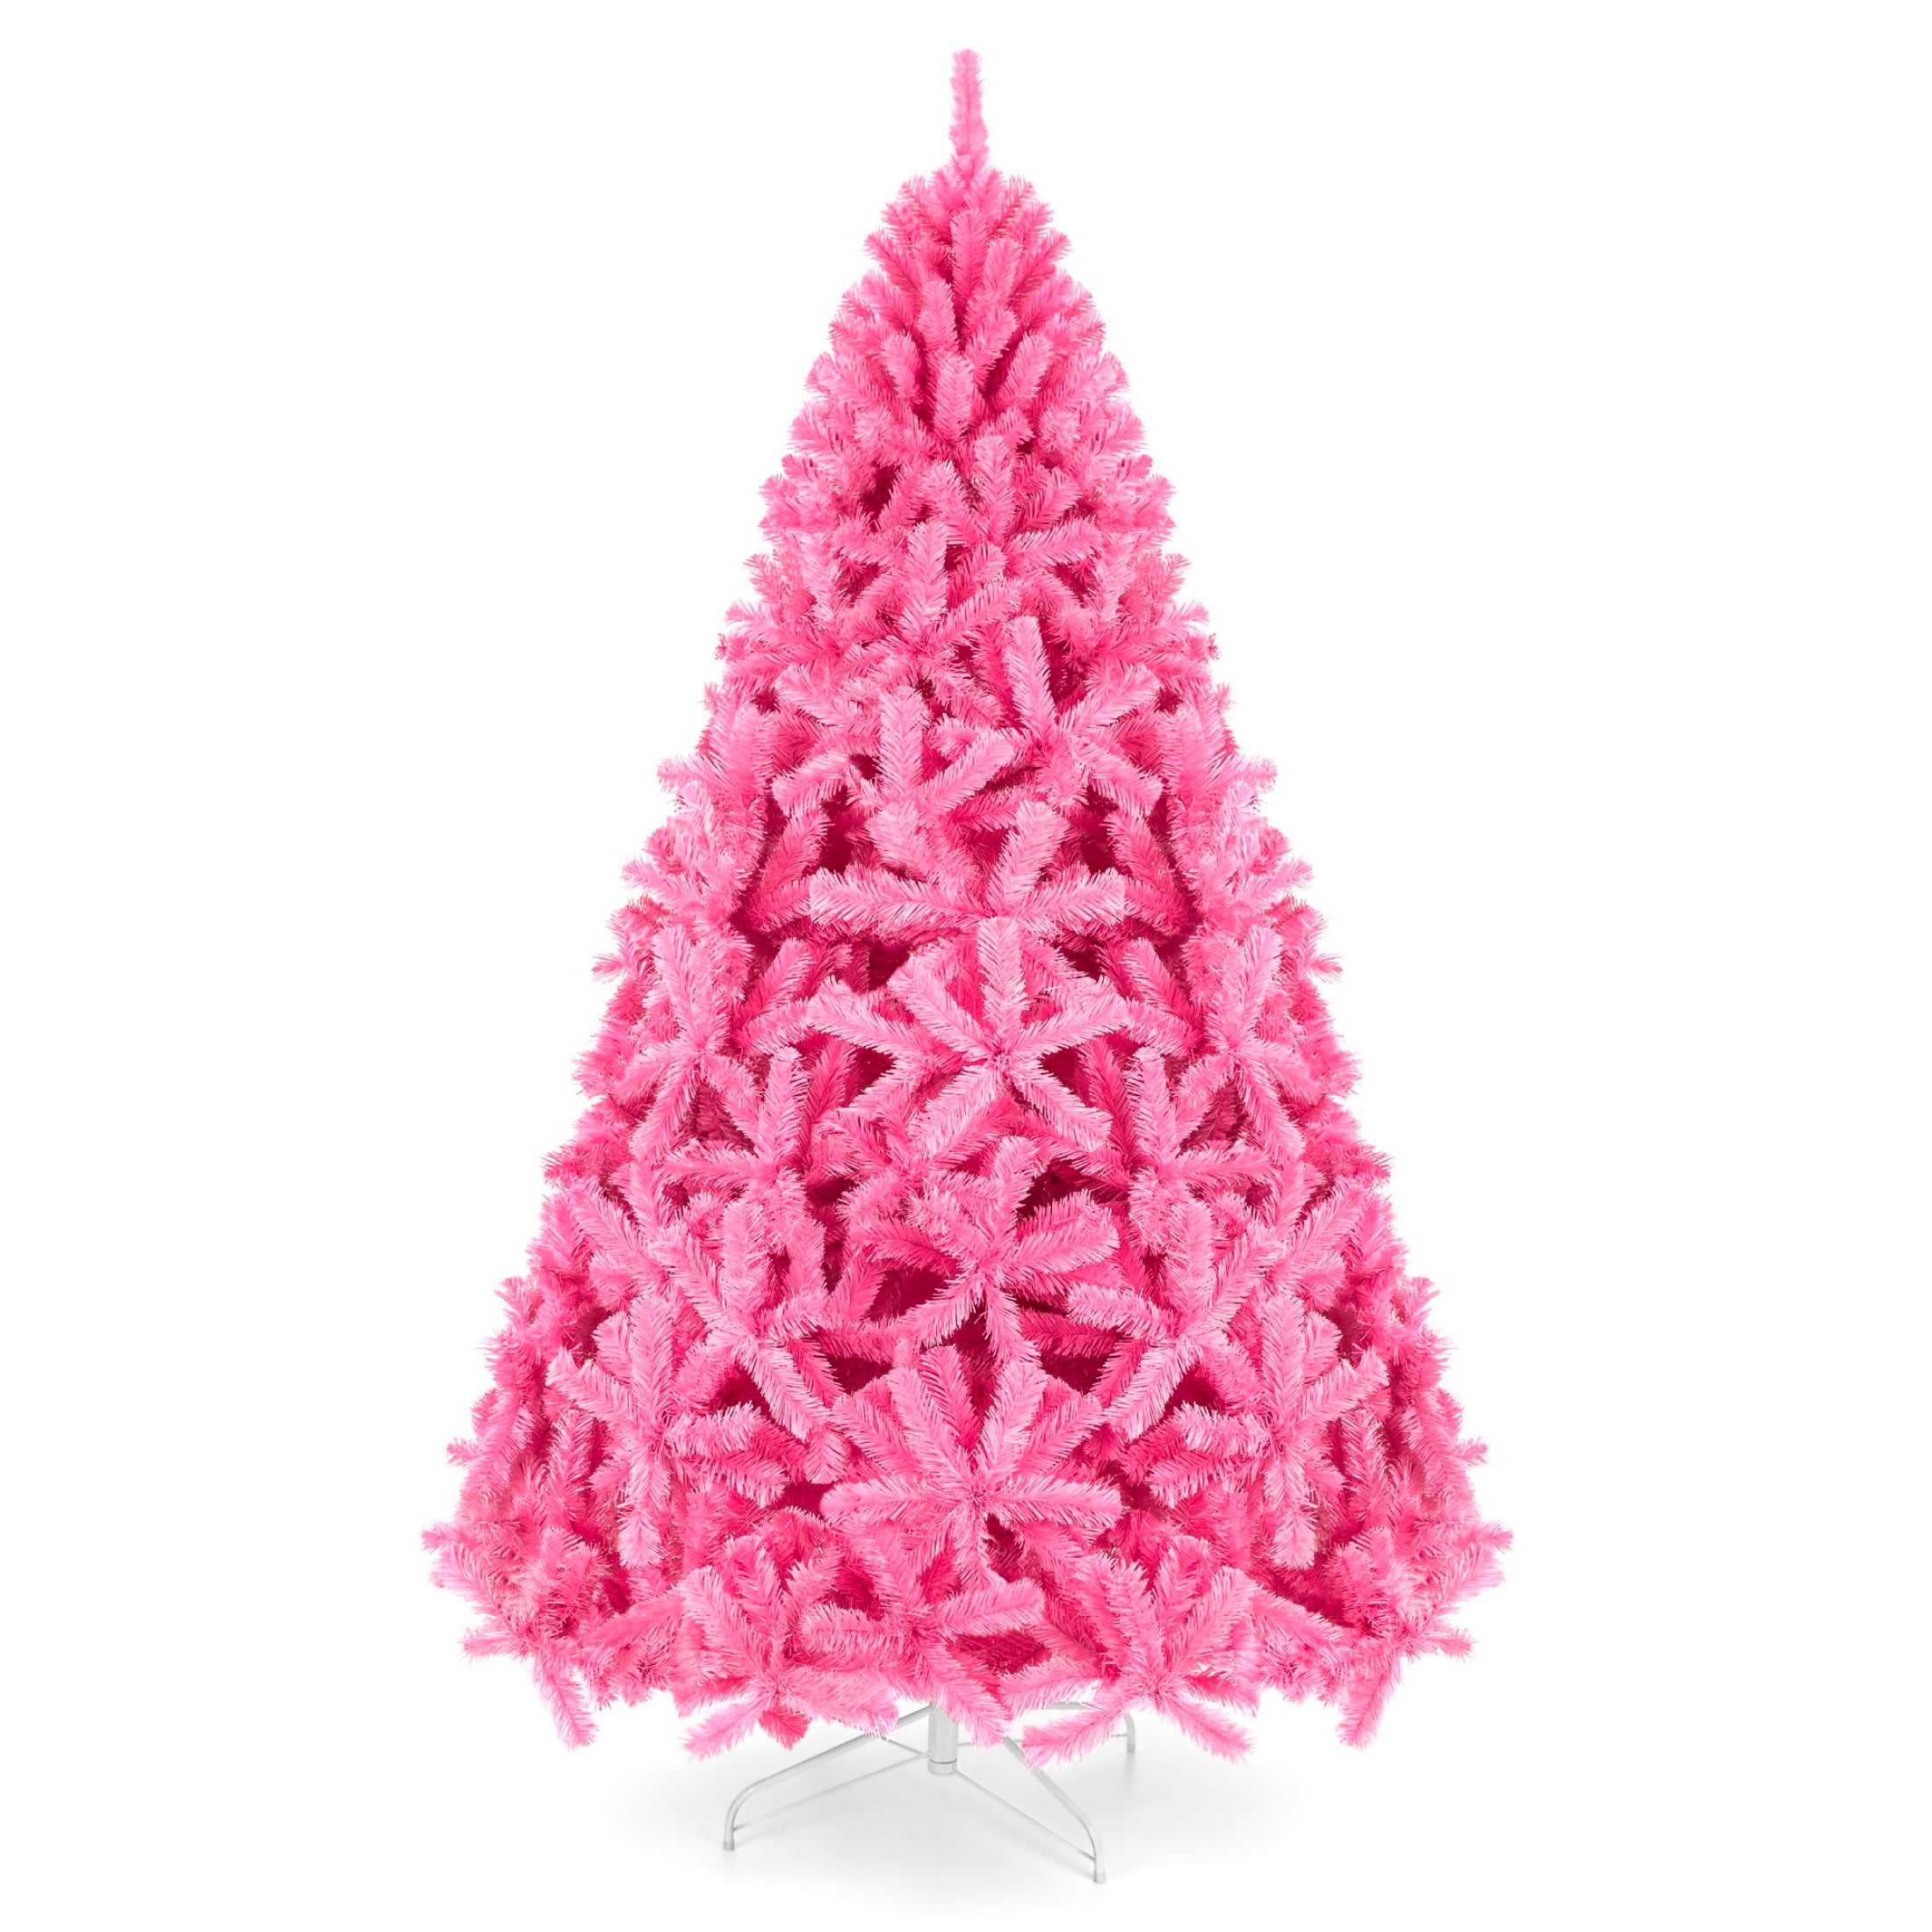 Sparkly Christmas Tree for $200, Pink